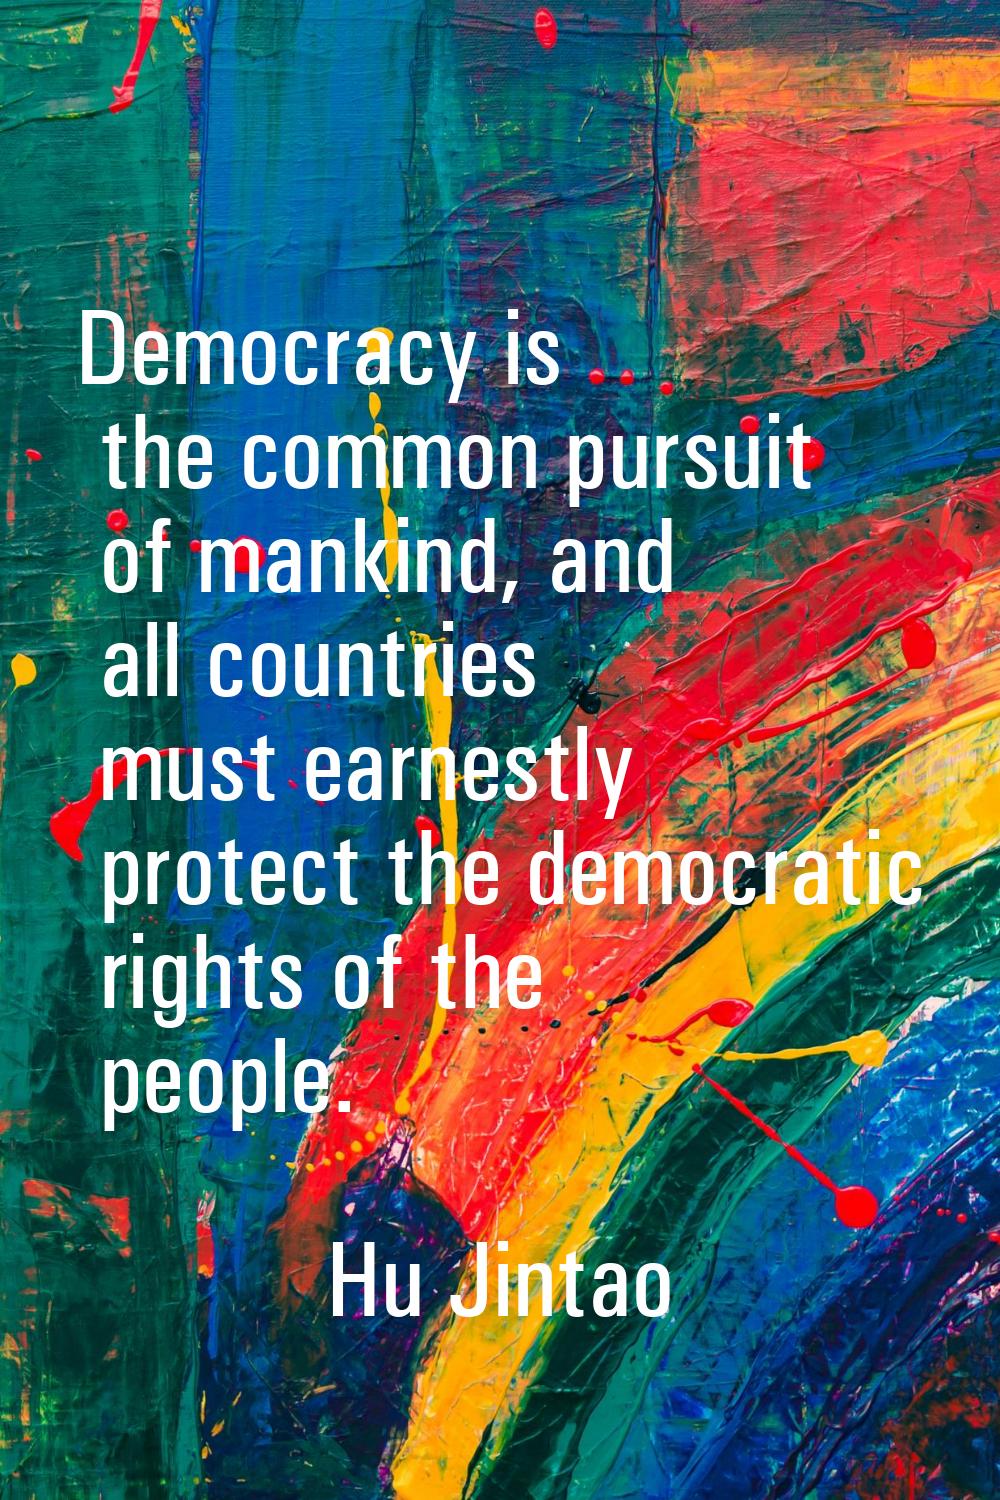 Democracy is the common pursuit of mankind, and all countries must earnestly protect the democratic